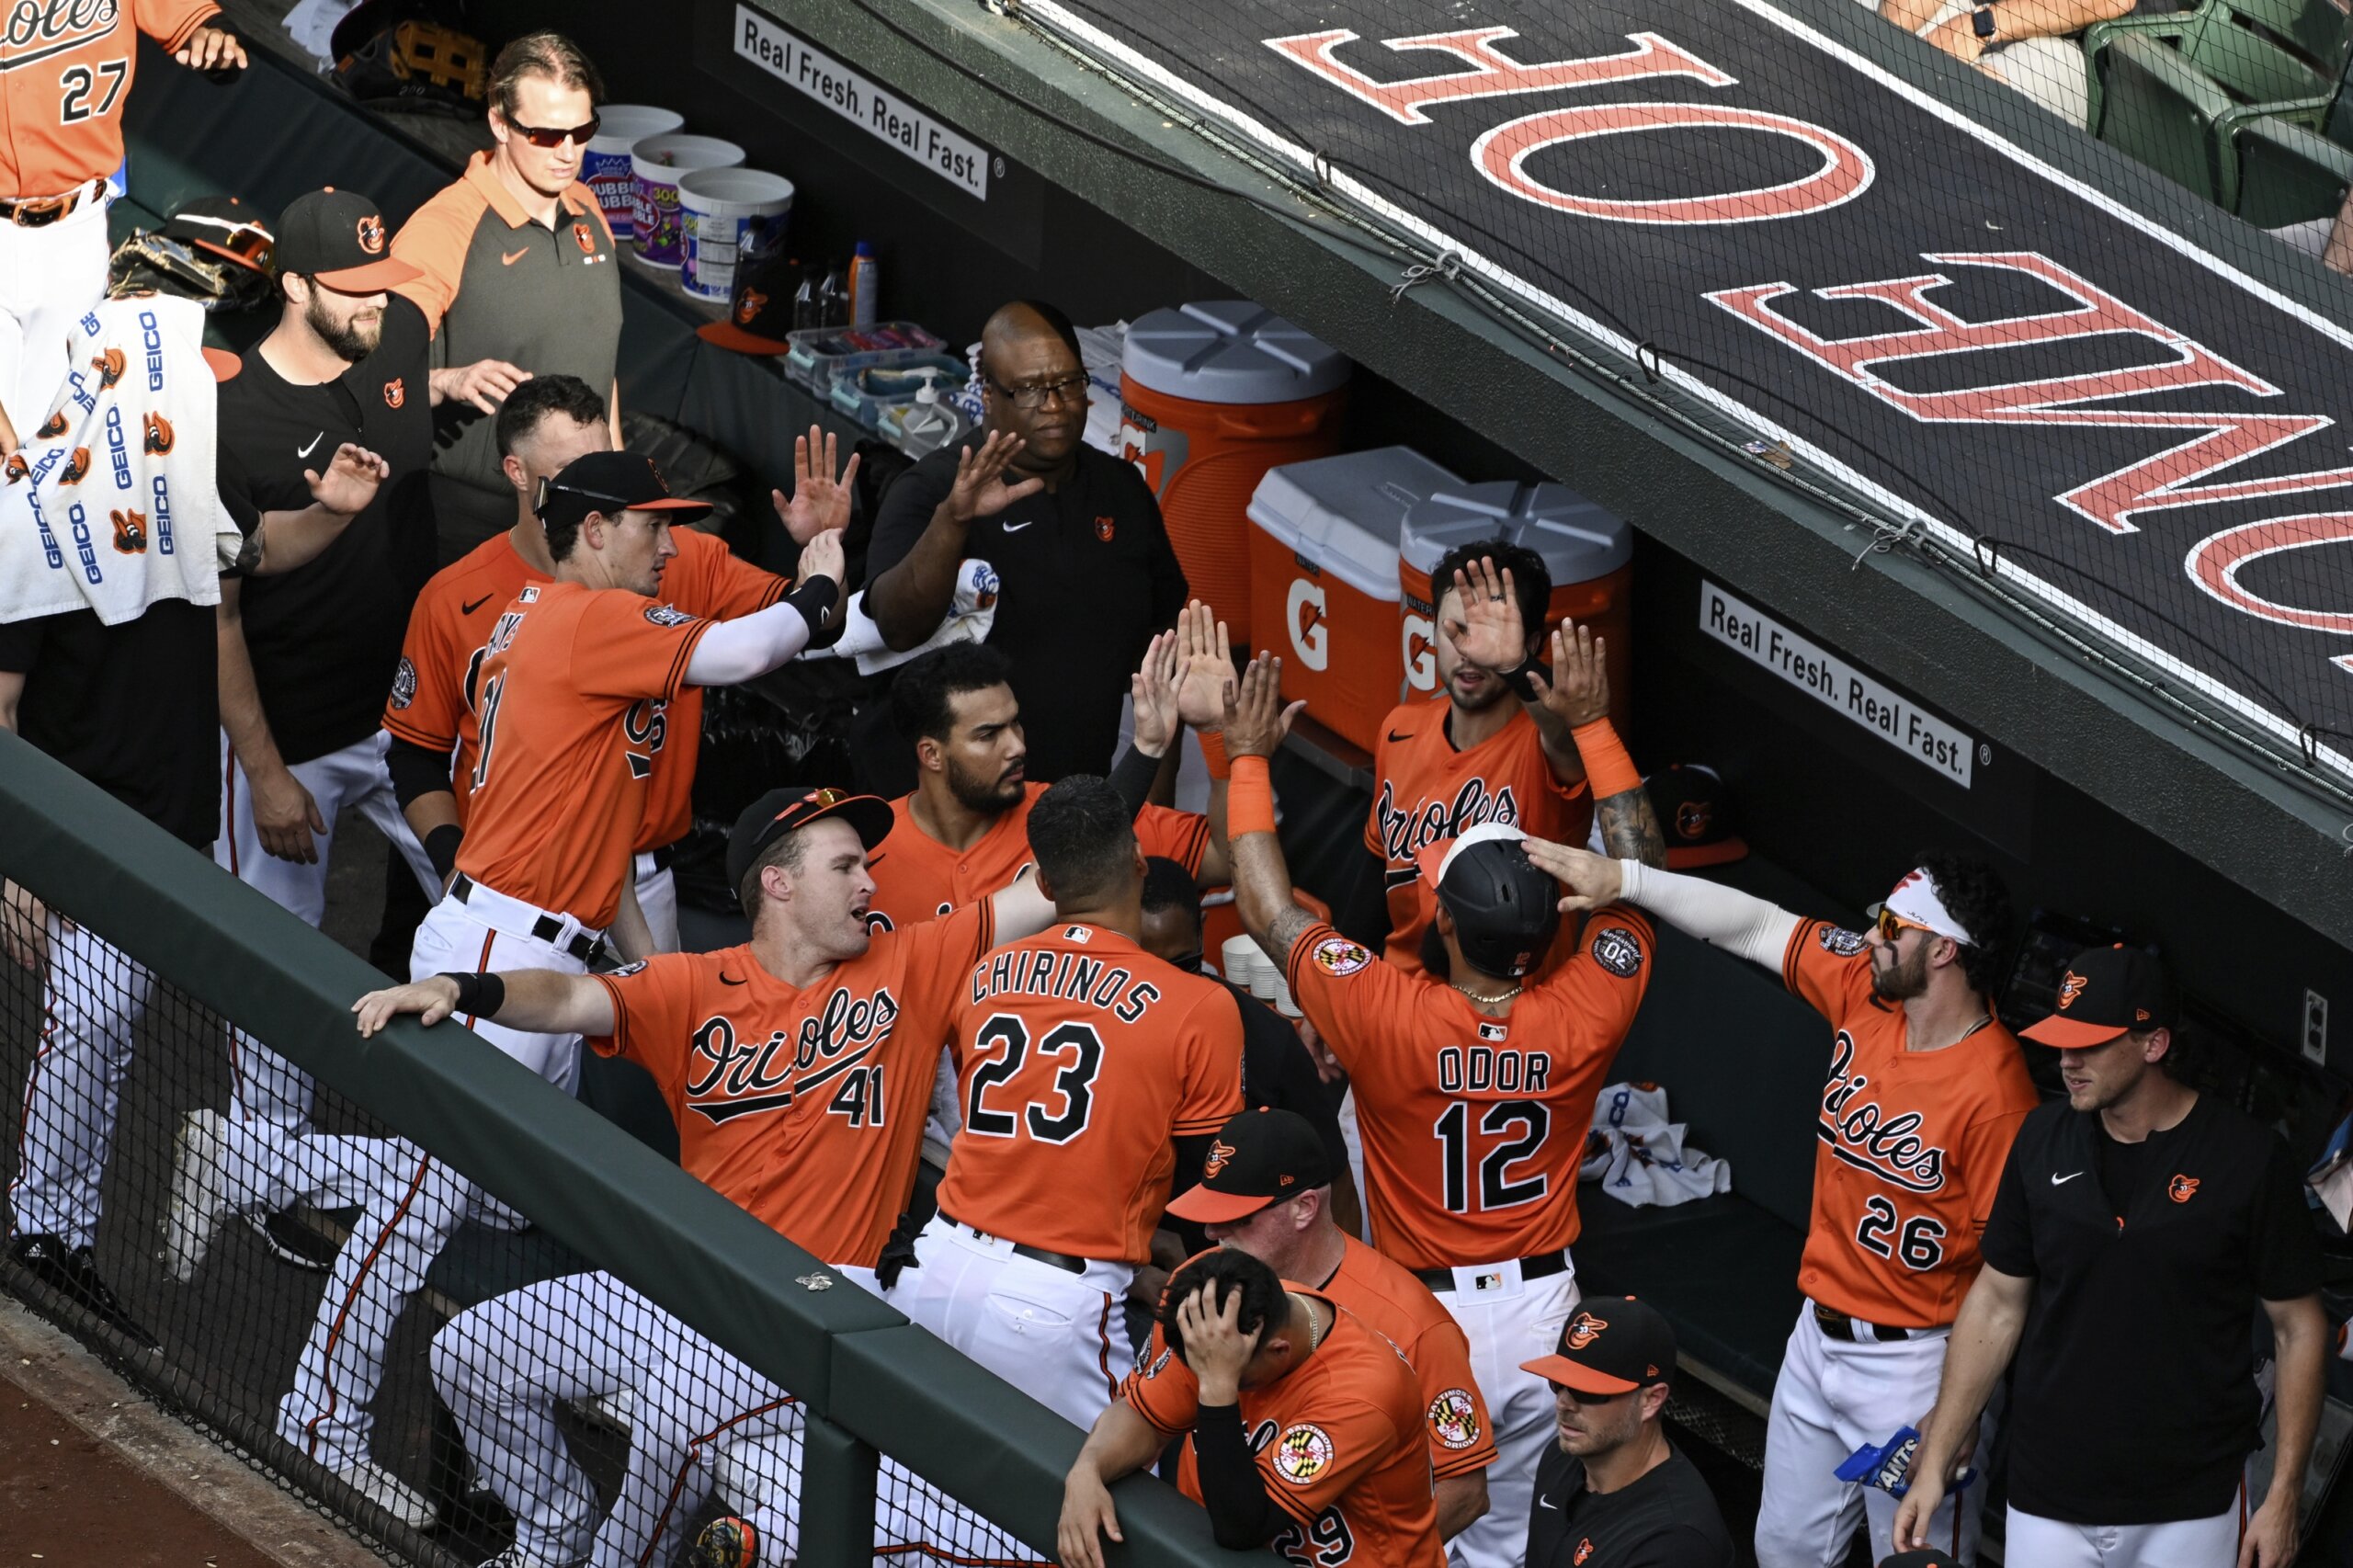 Orioles run winning streak to 5 with 63 win over Pirates WTOP News